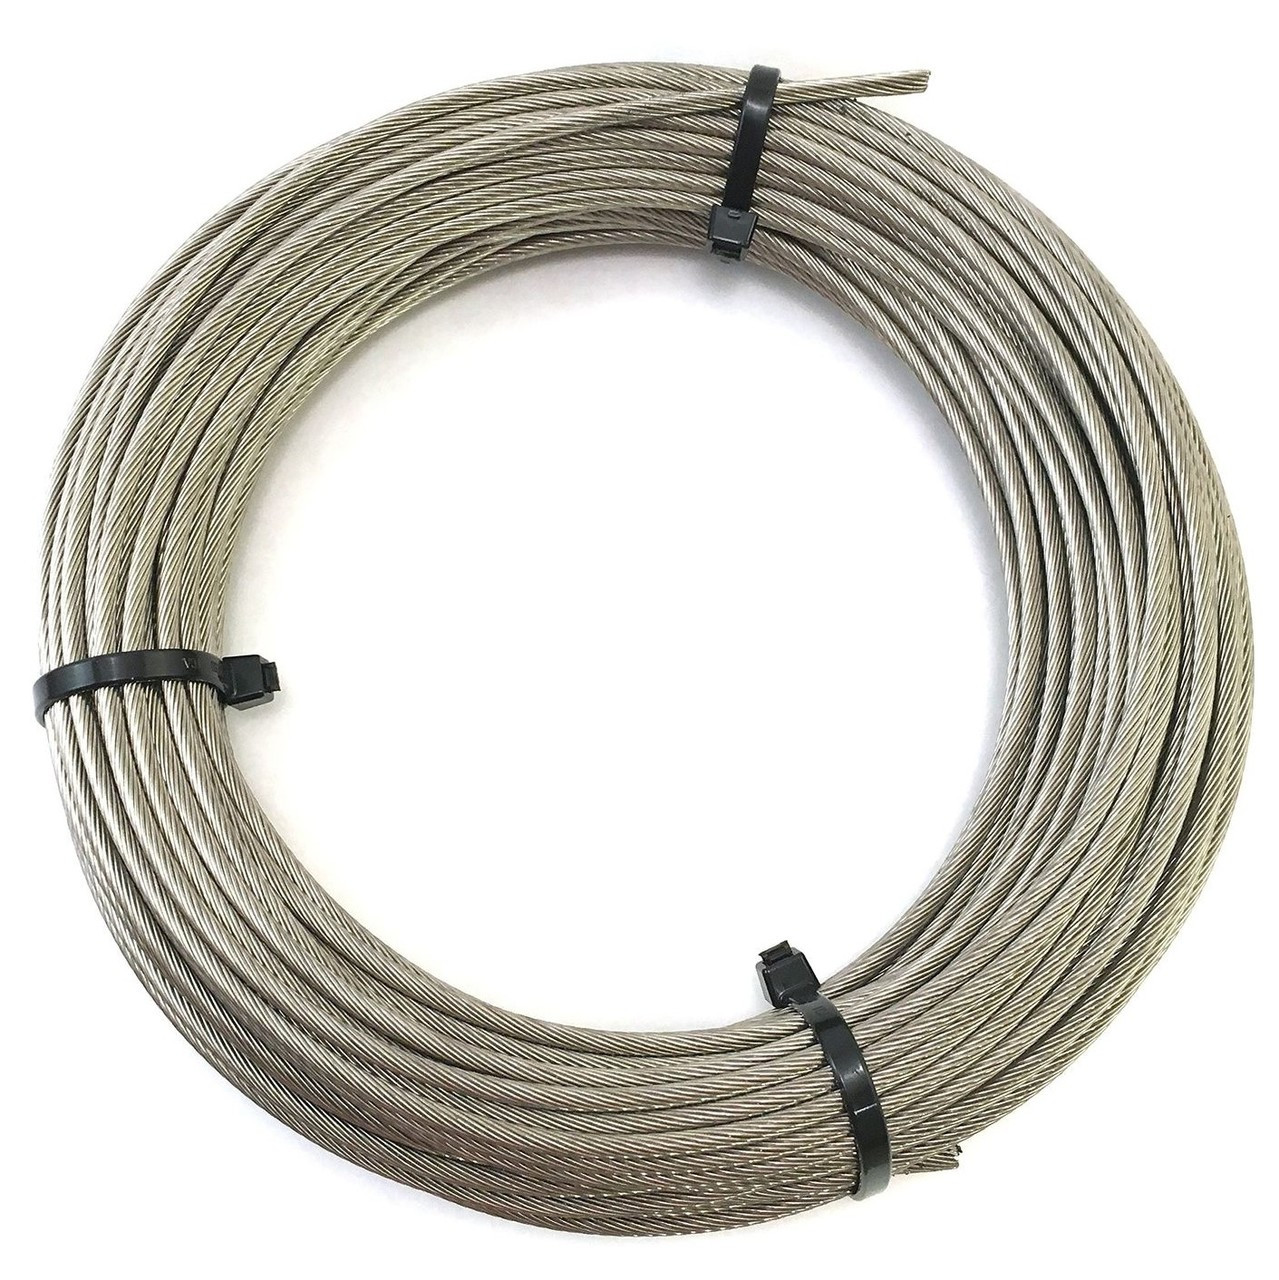 High Brightness Stainless Steel 316 Wire Rope Cable 3/16 7x19 by